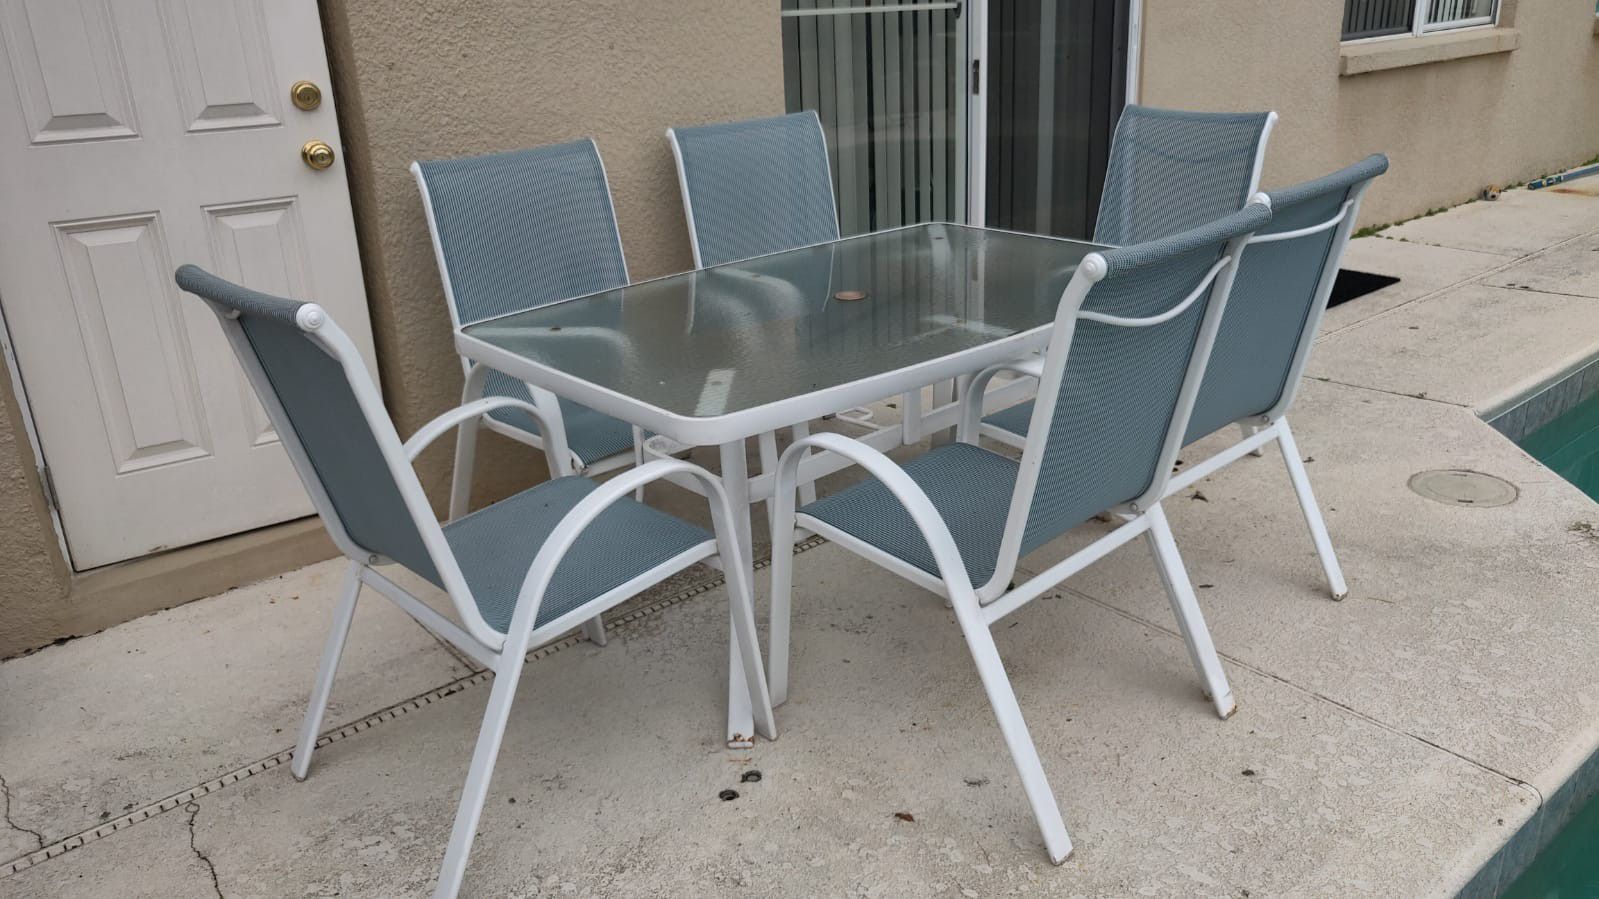 Outside Table with Chairs